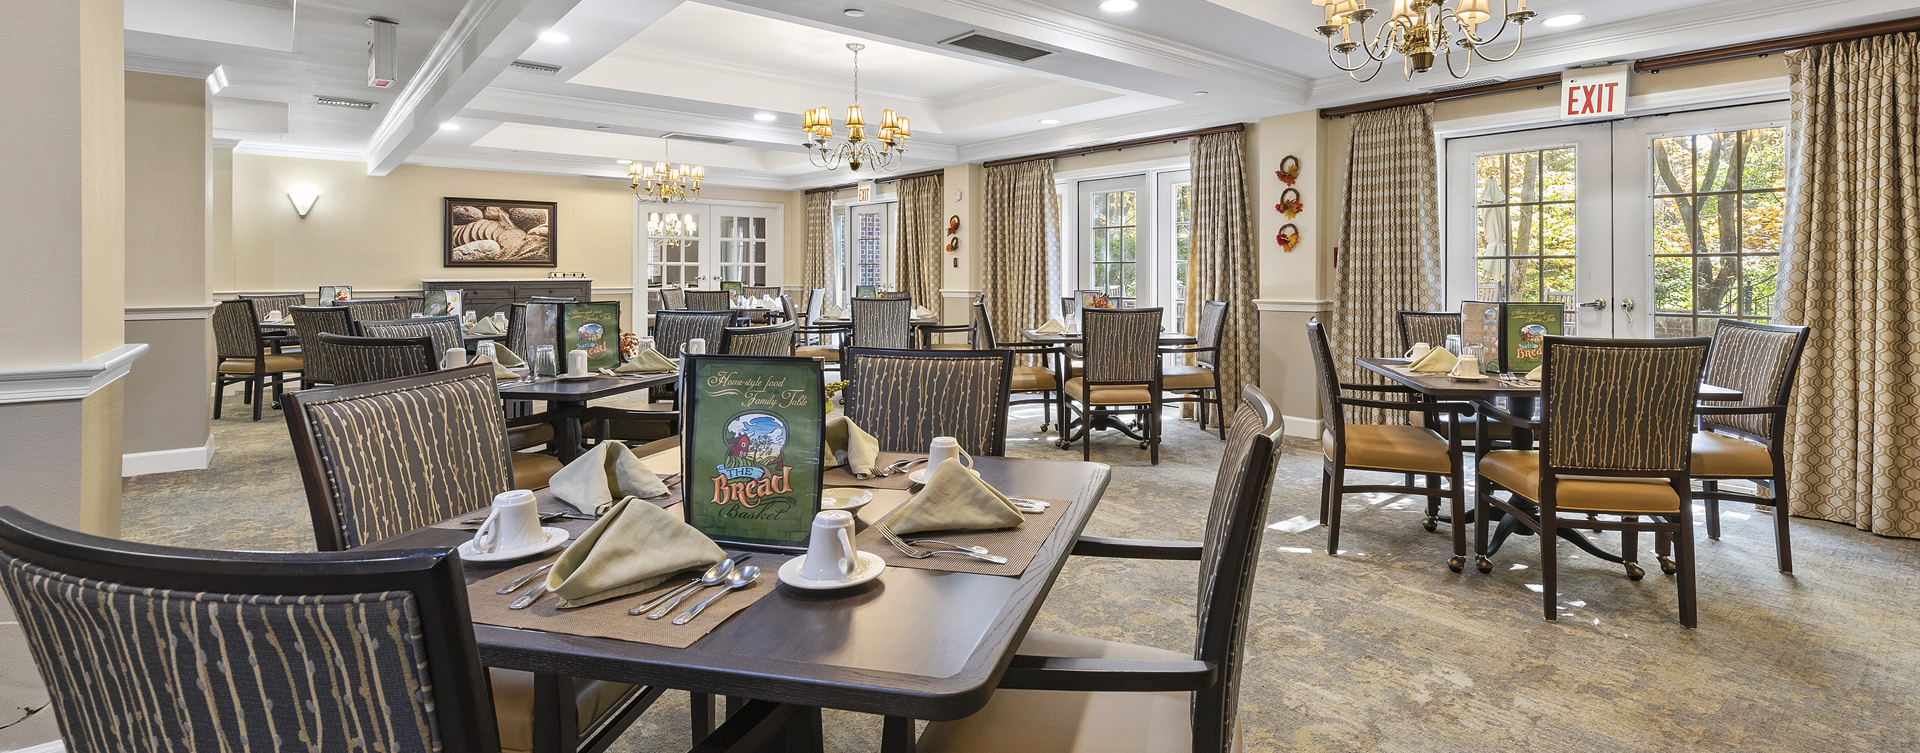 Enjoy restaurant -style meals served three times a day in our dining room at Bickford of Worthington